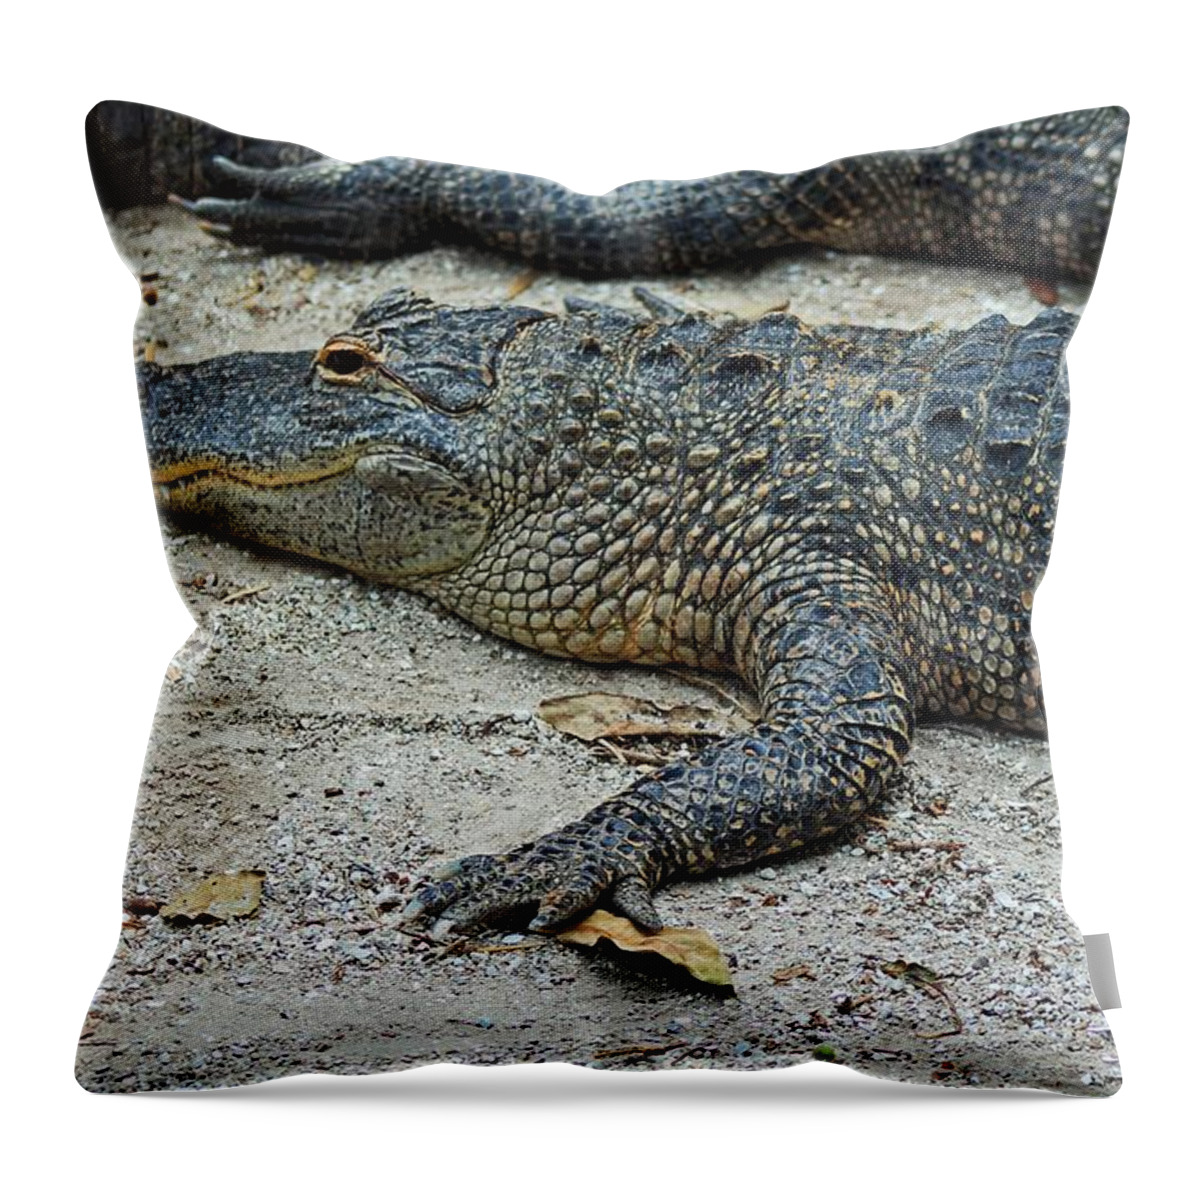 Alligator Throw Pillow featuring the photograph Erratic Eminence by Michiale Schneider